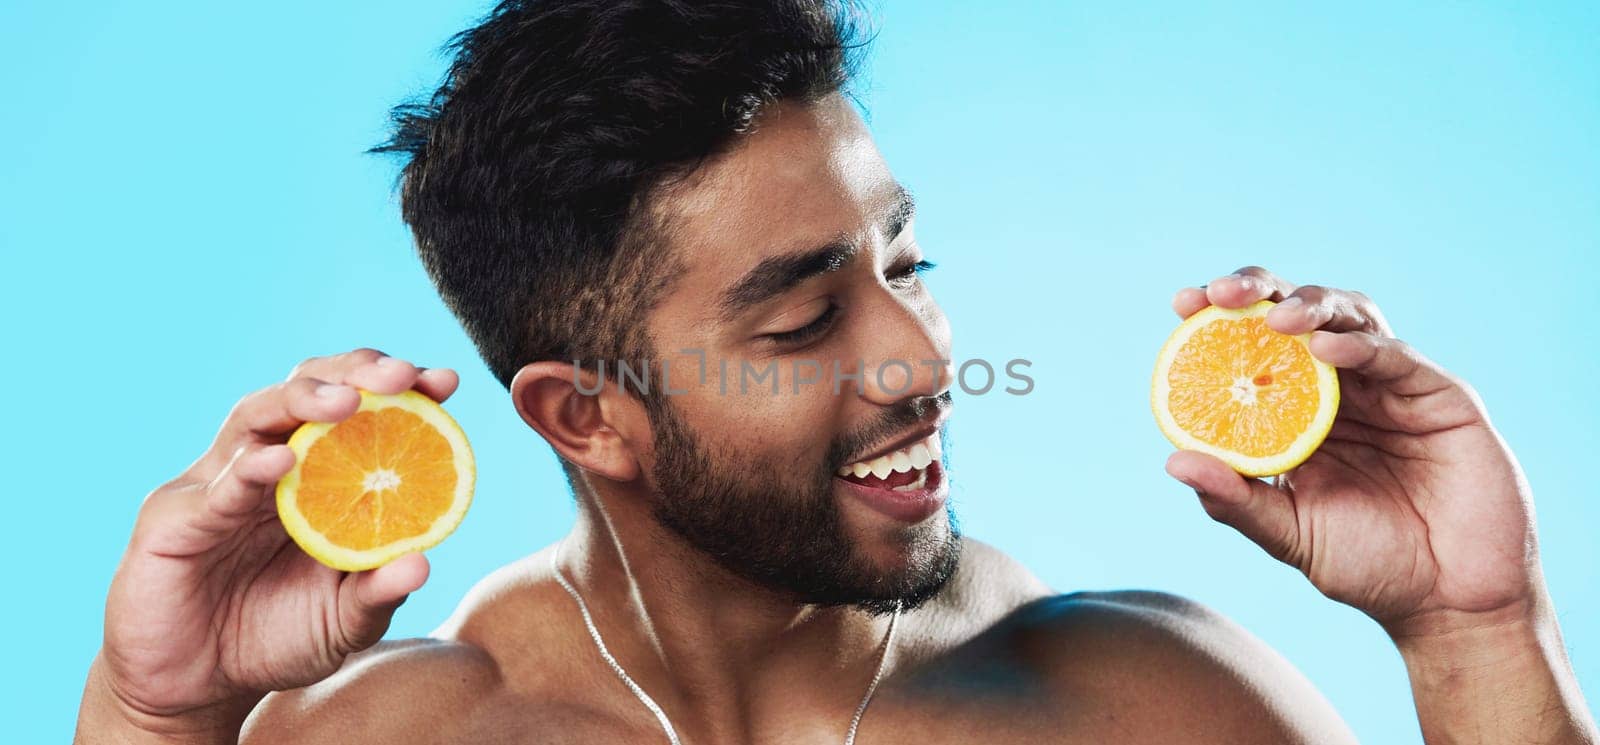 Orange, skincare and face of man in studio for beauty, wellness and citrus treatment on blue background. Fruit, facial and portrait of indian male model excited for organic vitamin c skin cosmetics by YuriArcurs